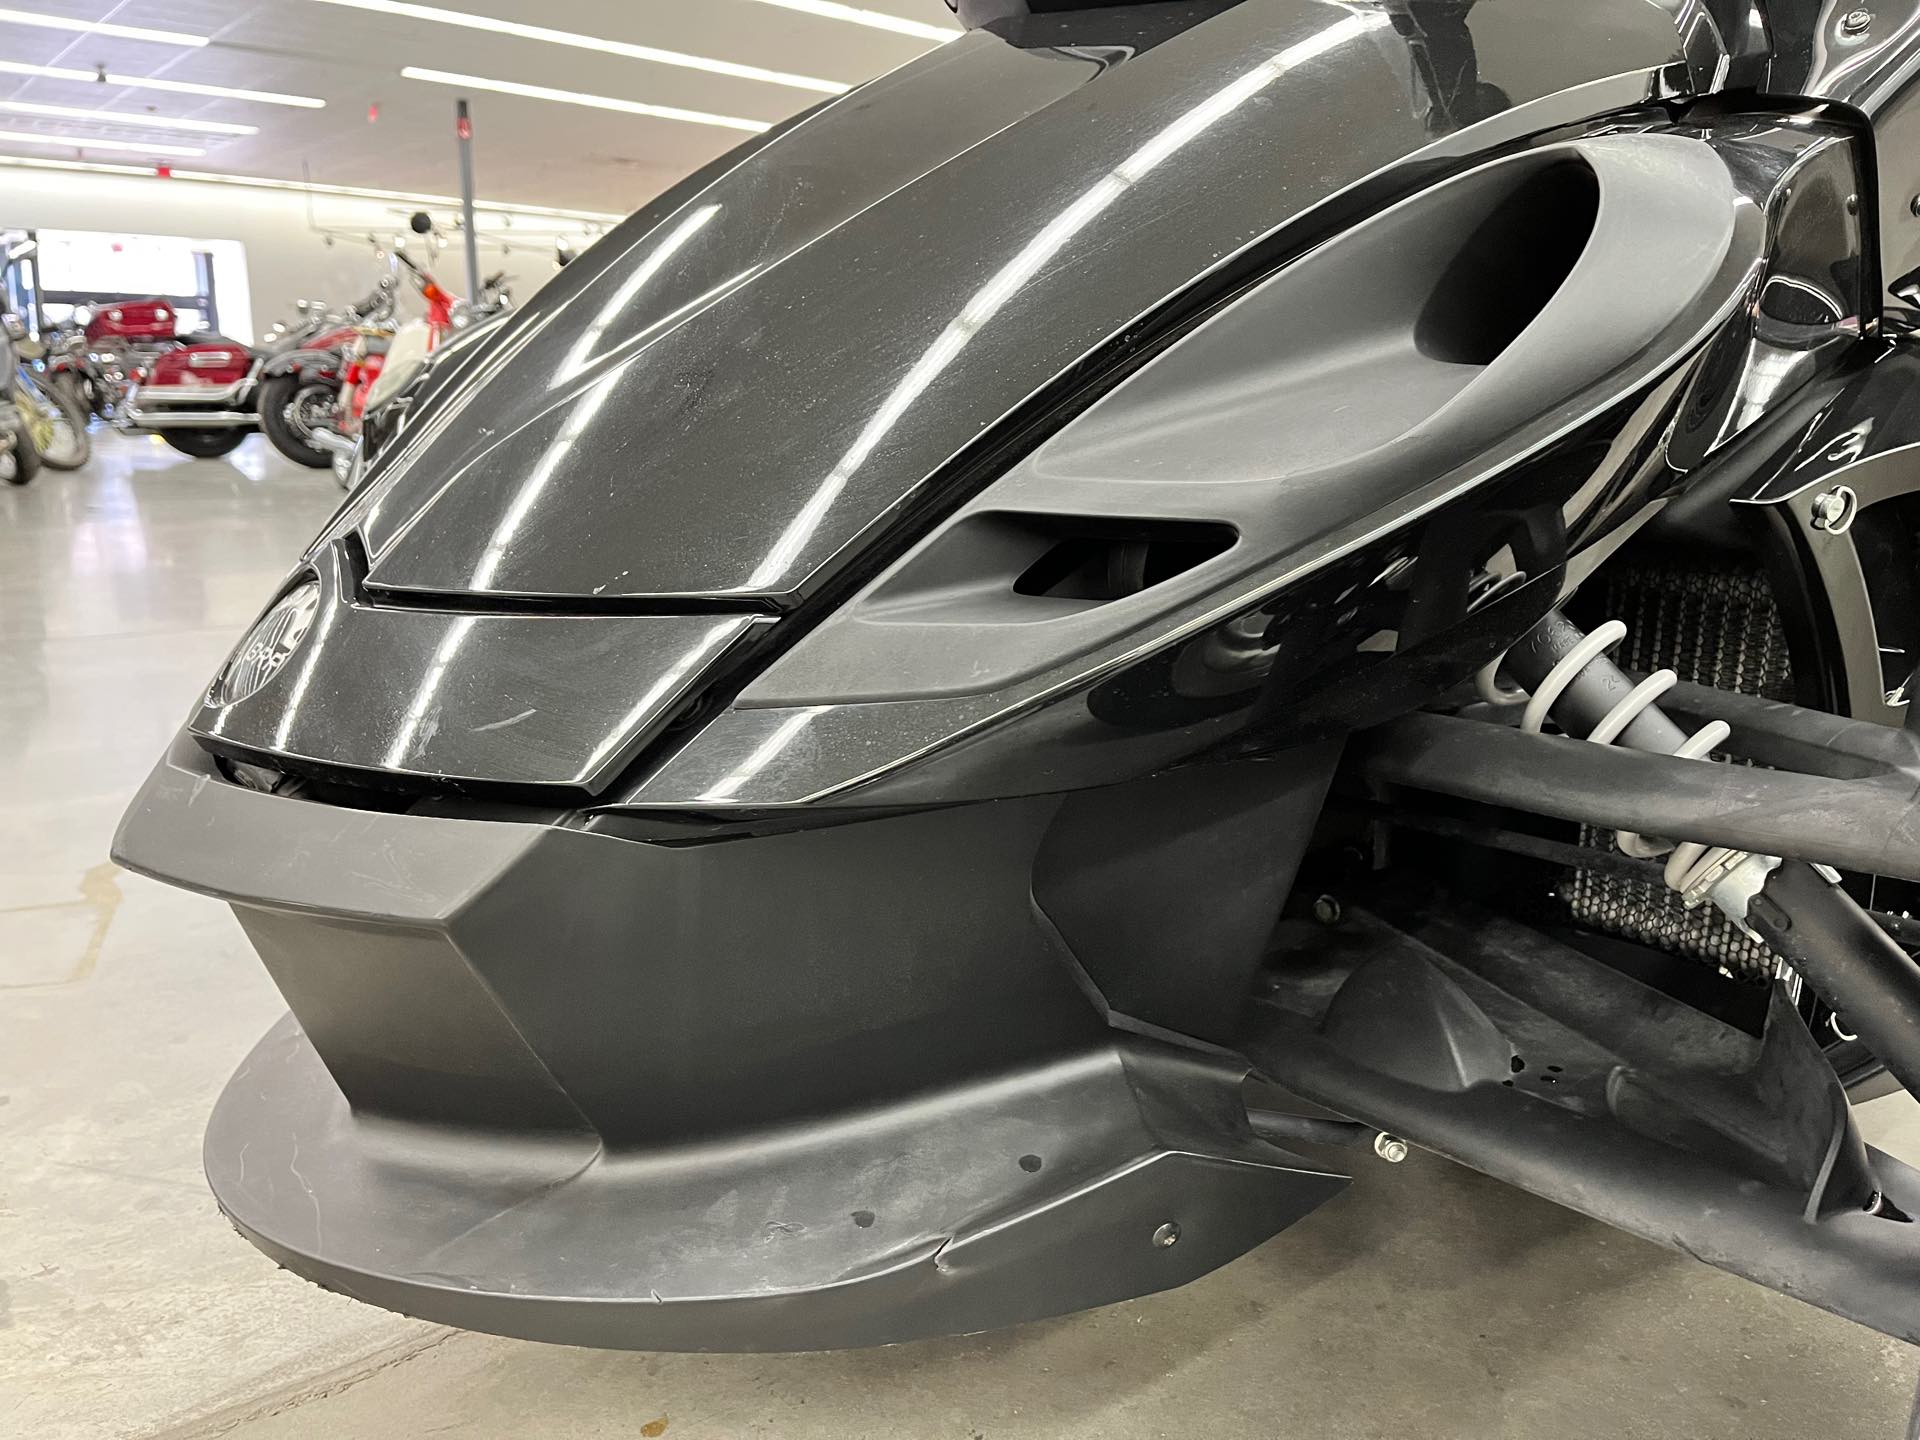 2012 CAN-AM SPYDER RS at Aces Motorcycles - Denver